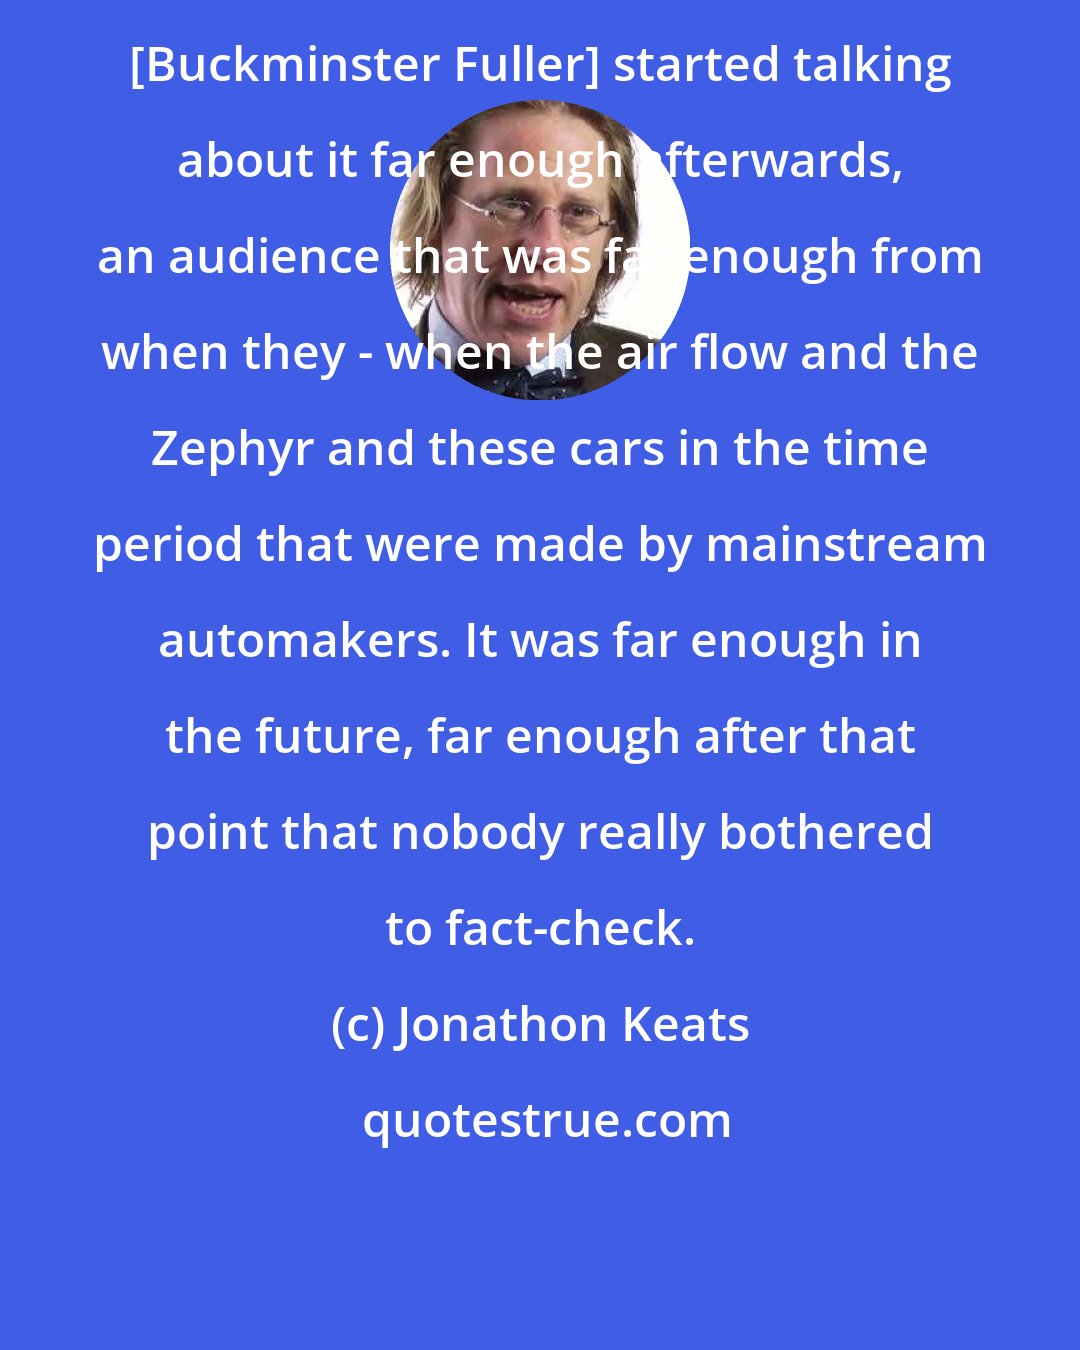 Jonathon Keats: [Buckminster Fuller] started talking about it far enough afterwards, an audience that was far enough from when they - when the air flow and the Zephyr and these cars in the time period that were made by mainstream automakers. It was far enough in the future, far enough after that point that nobody really bothered to fact-check.